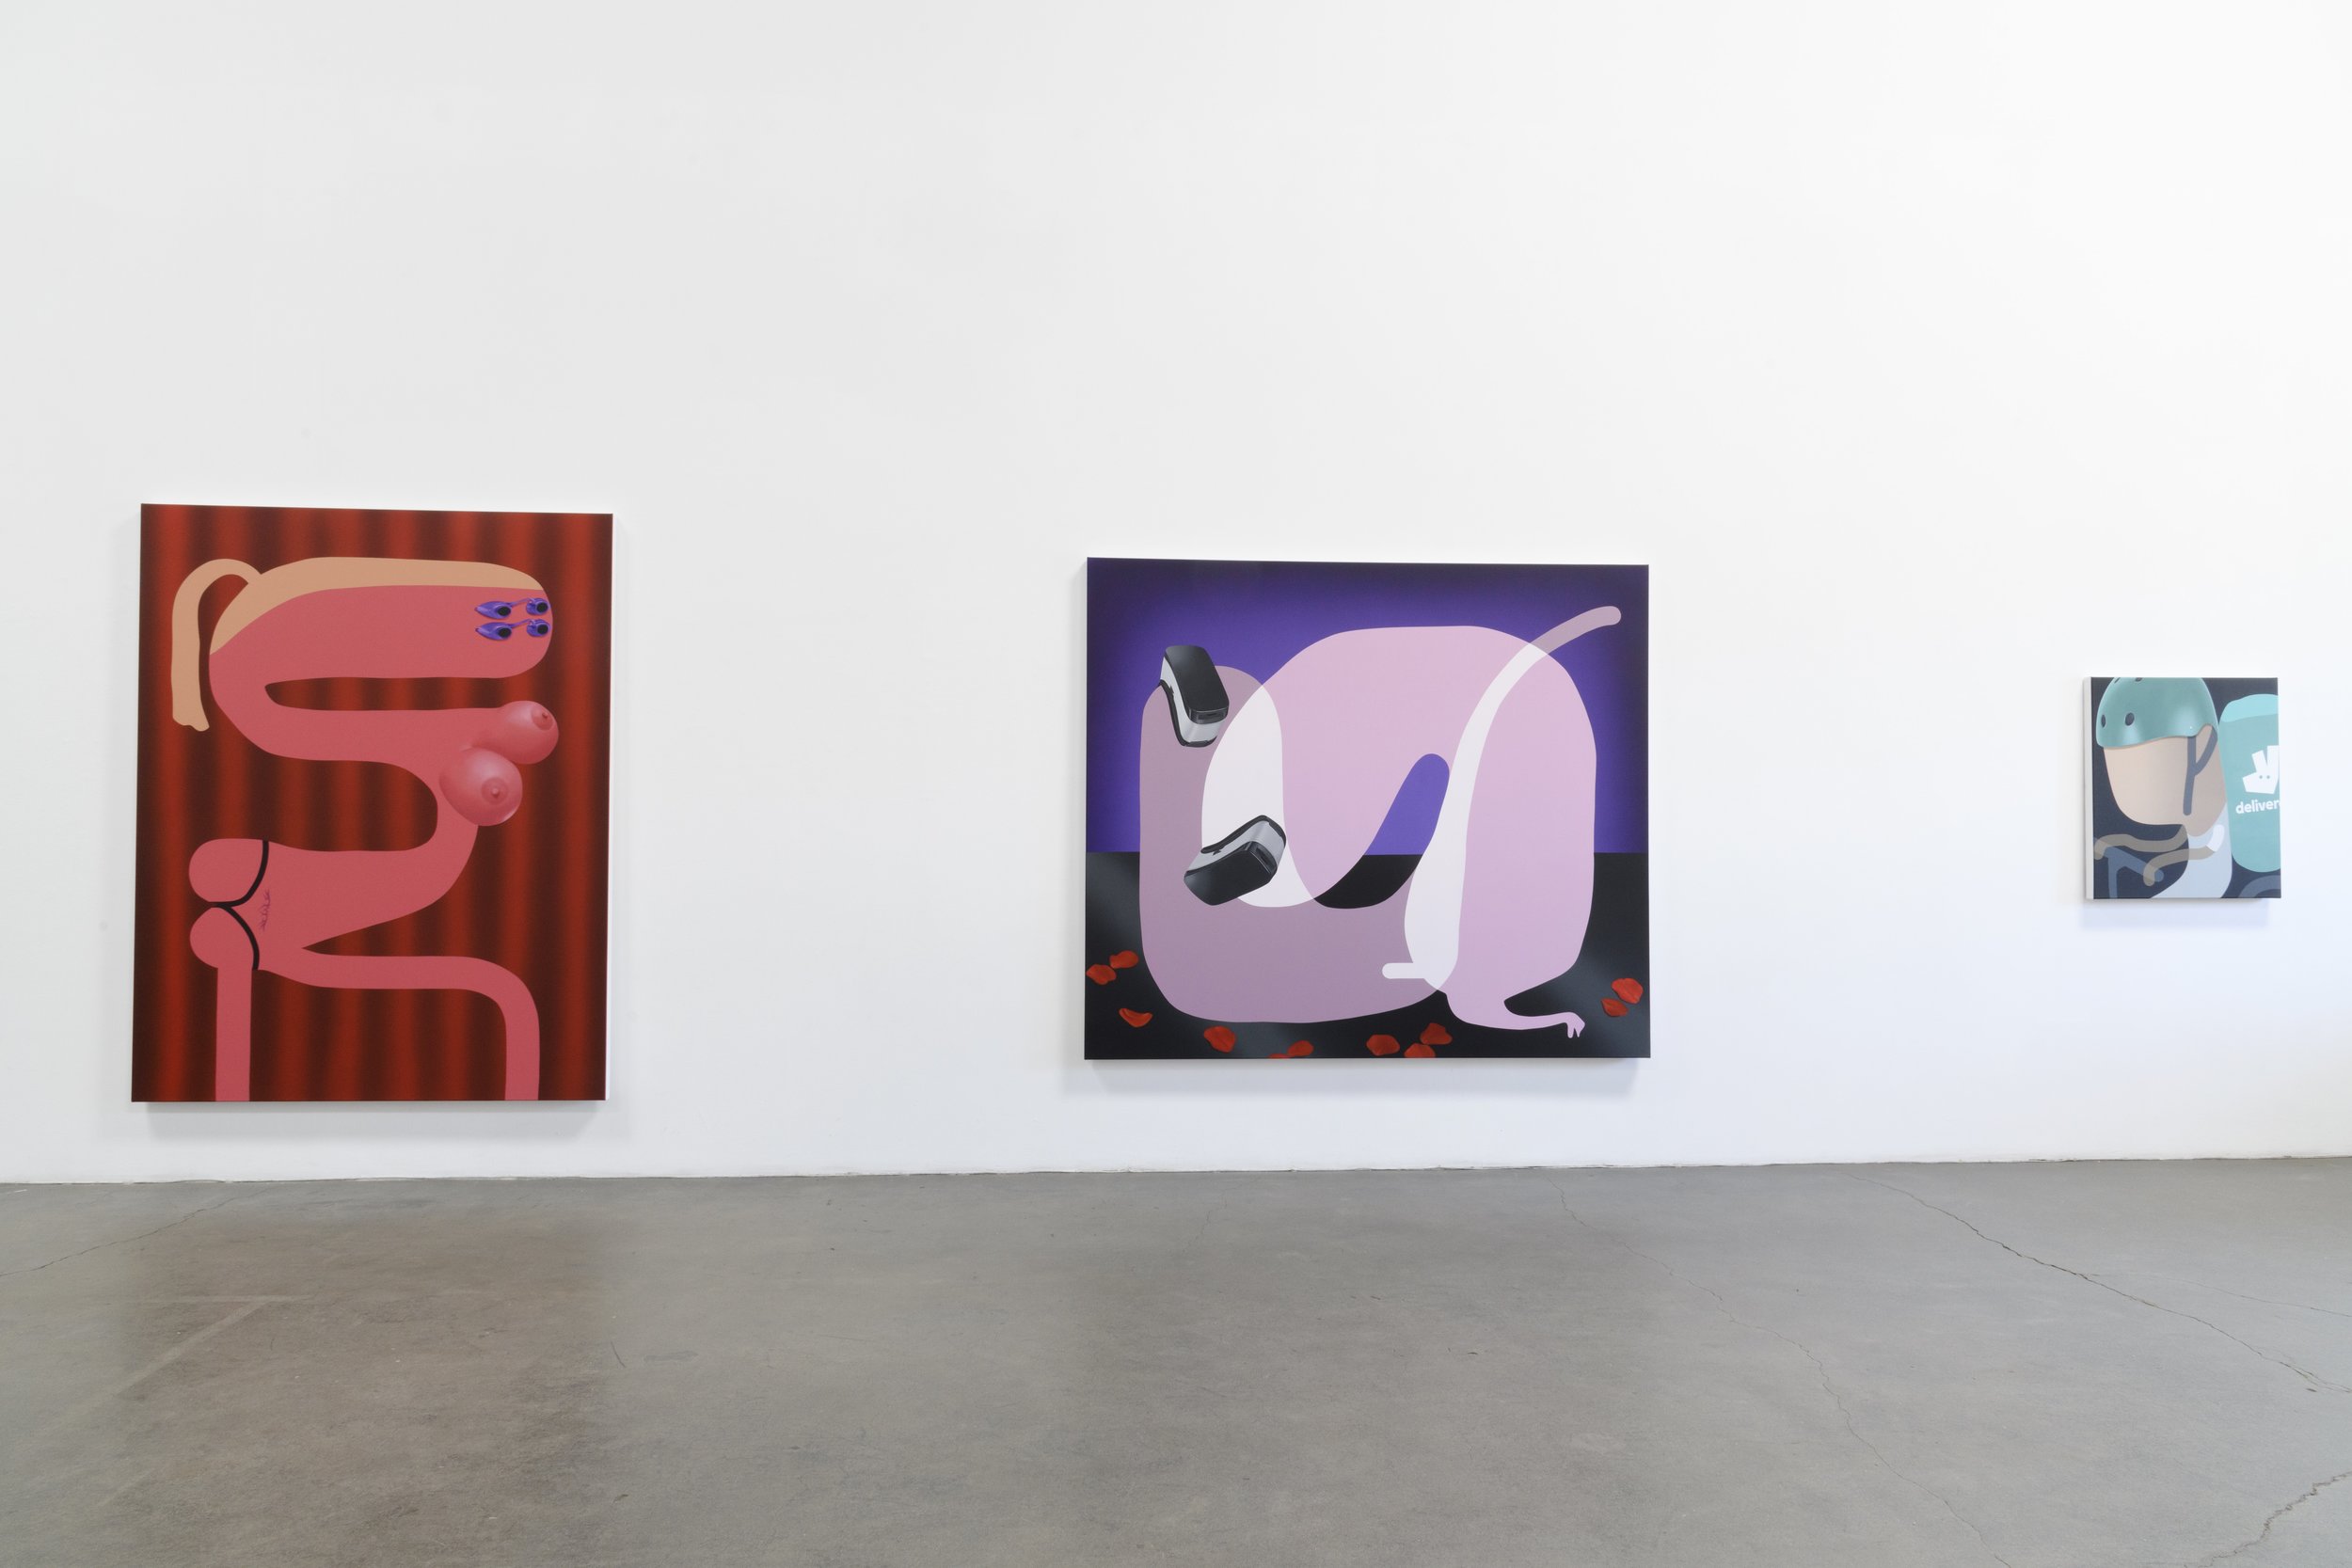 'Contactless' at Richard Heller Gallery, LA ('10 Minutes', 'Real Love' and 'Faster')